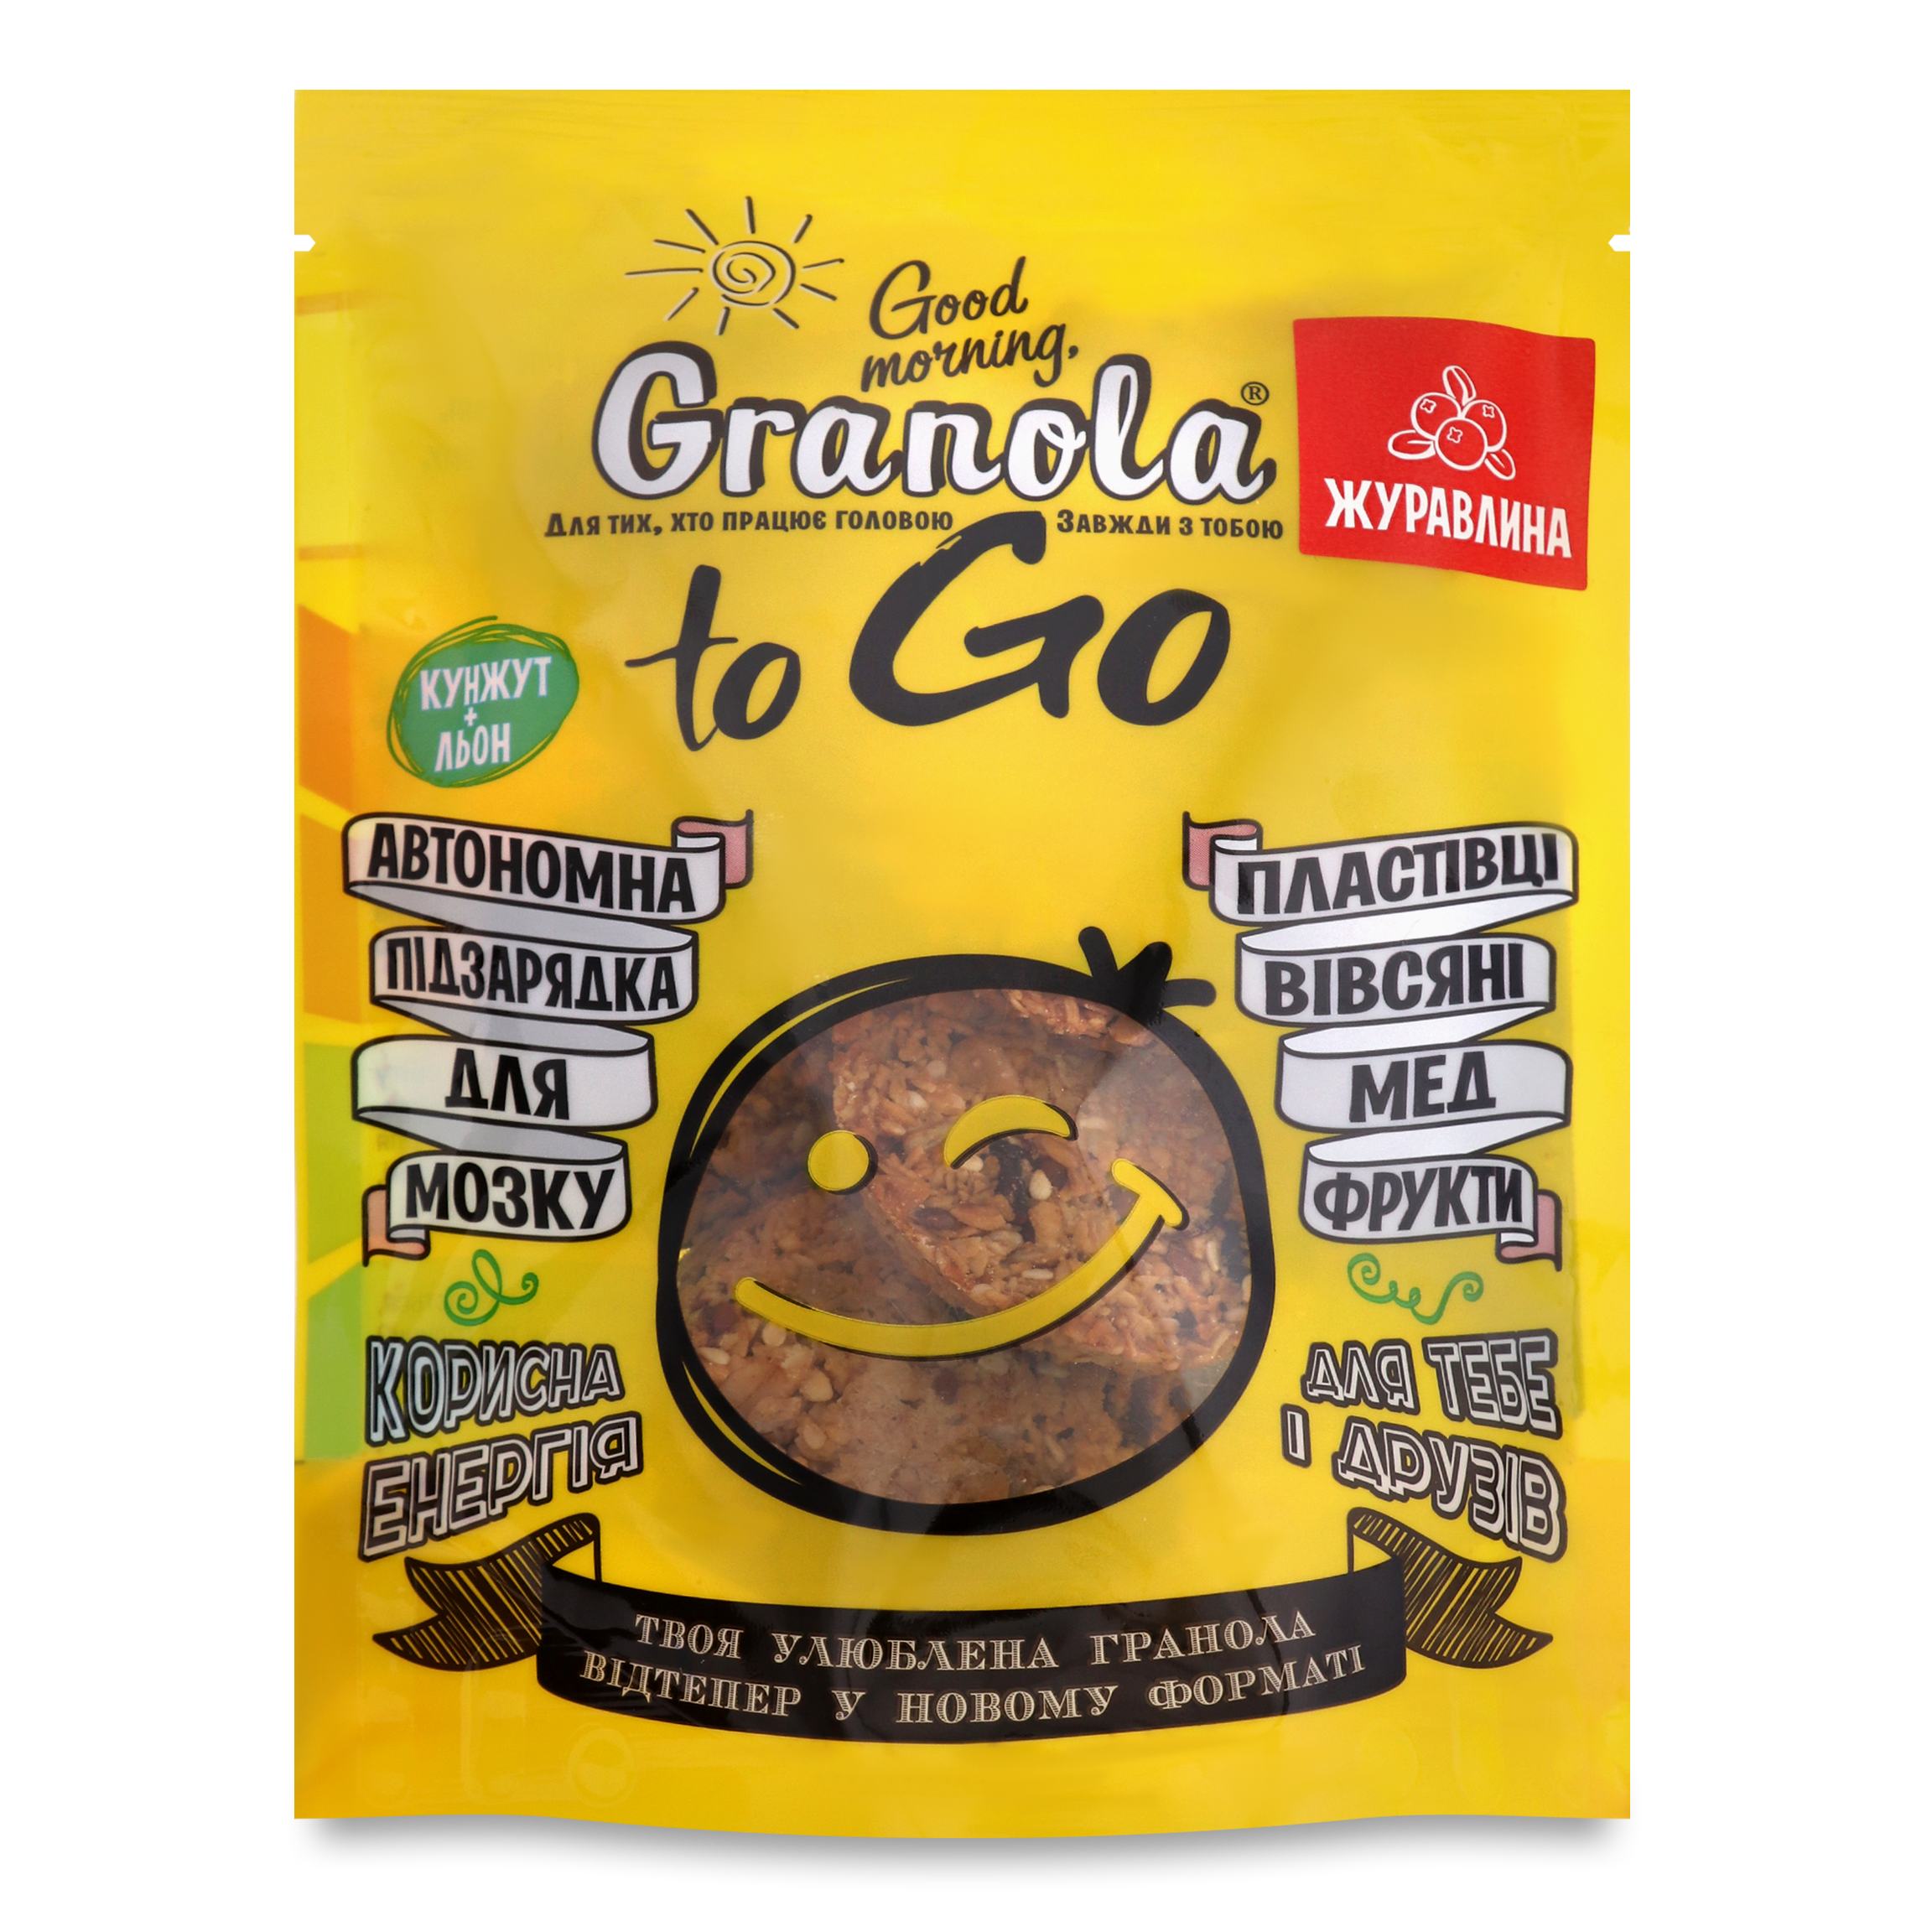 Good morning, Granola To Go with Сranberry Granola 140g